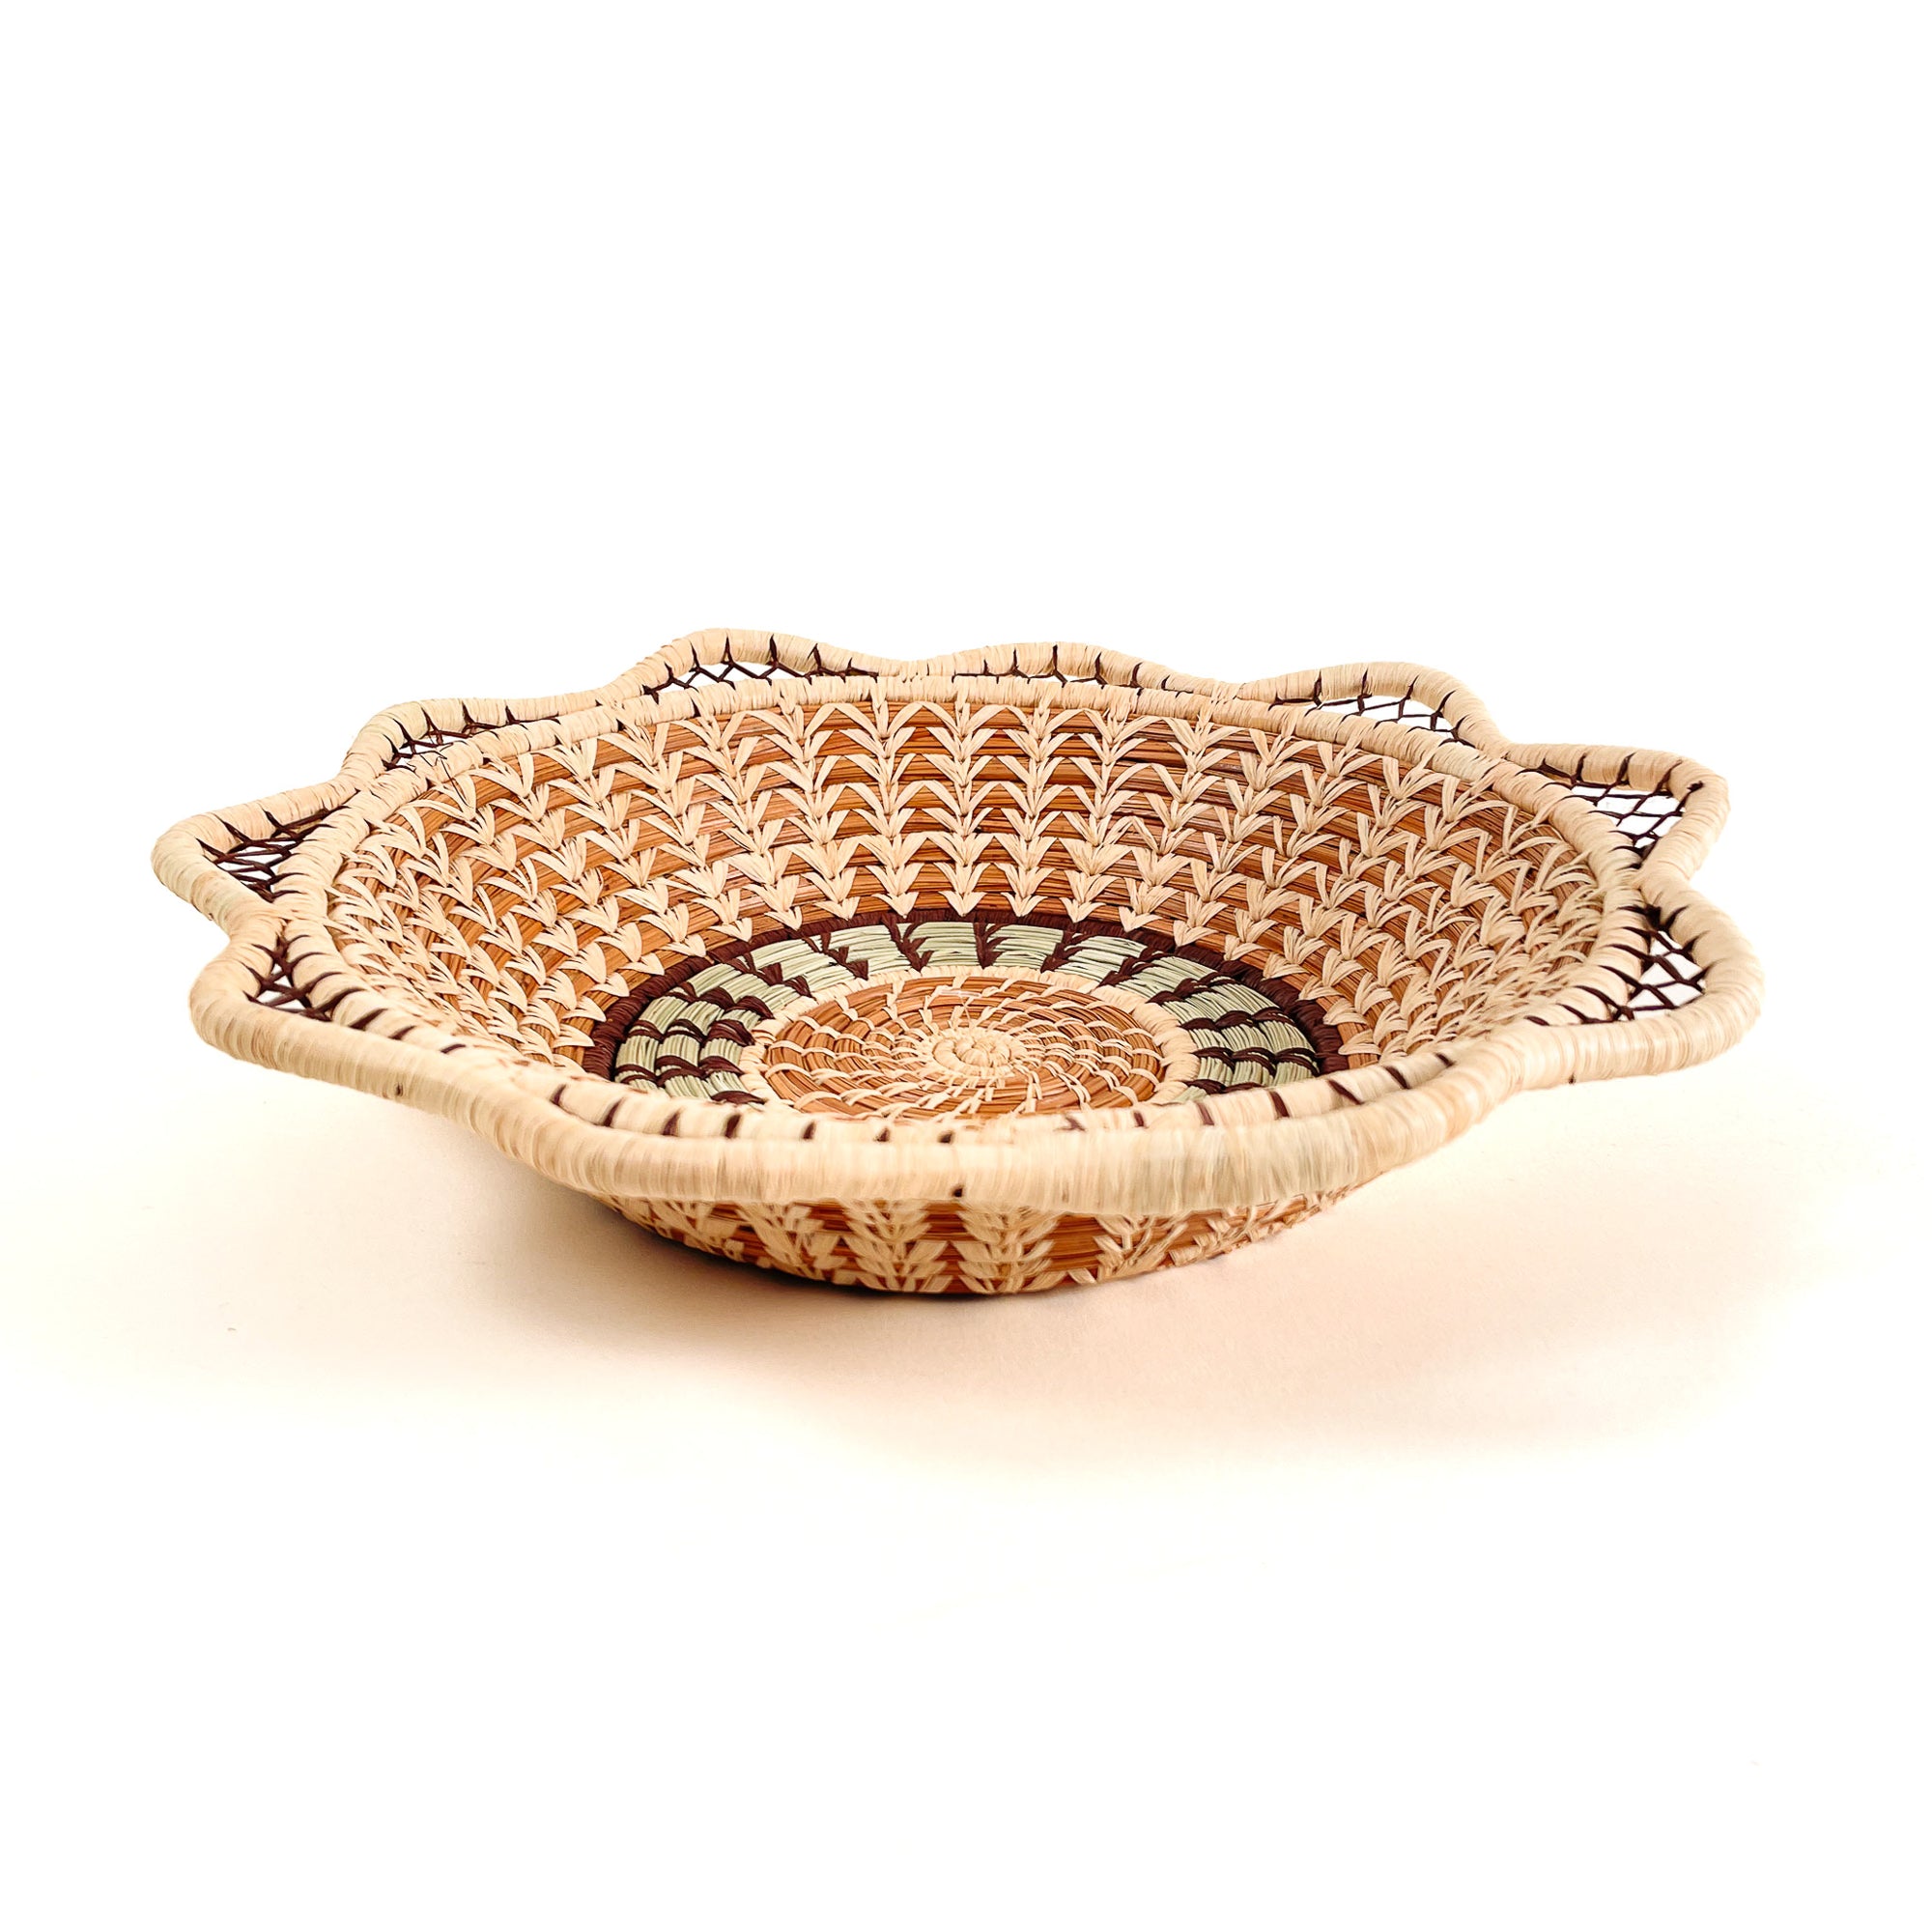 Pine needle handmade basket with traditional designs - top view